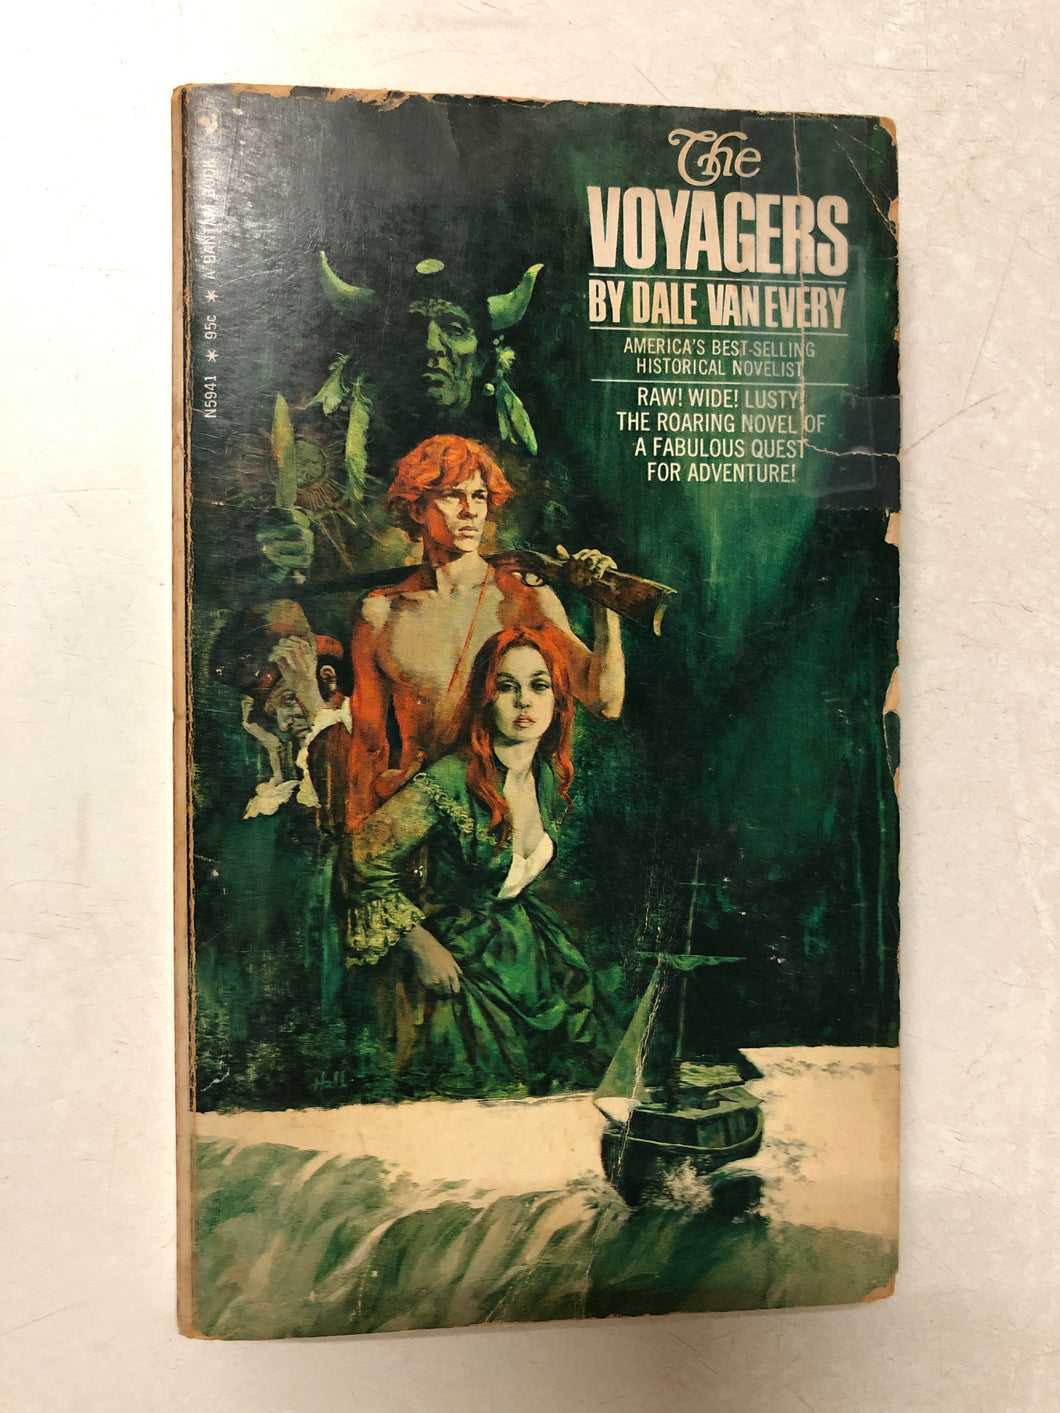 The Voyagers - Slick Cat Books 